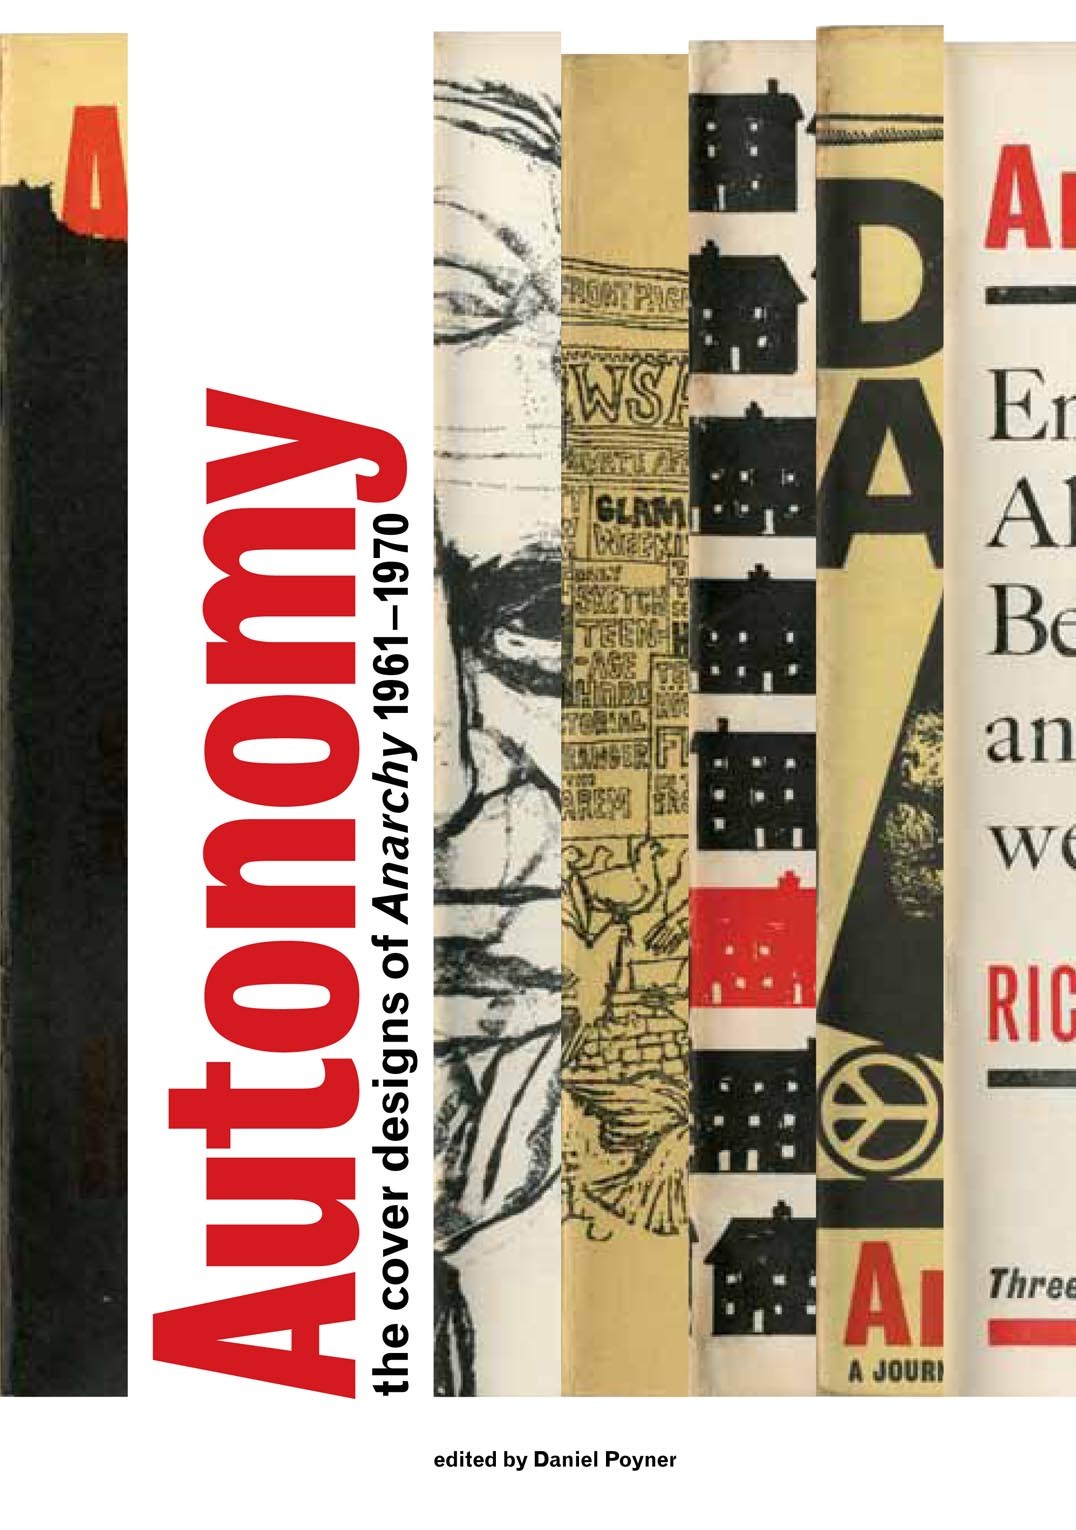 Autonomy: the cover deisgns of Anarchy 1961-1870